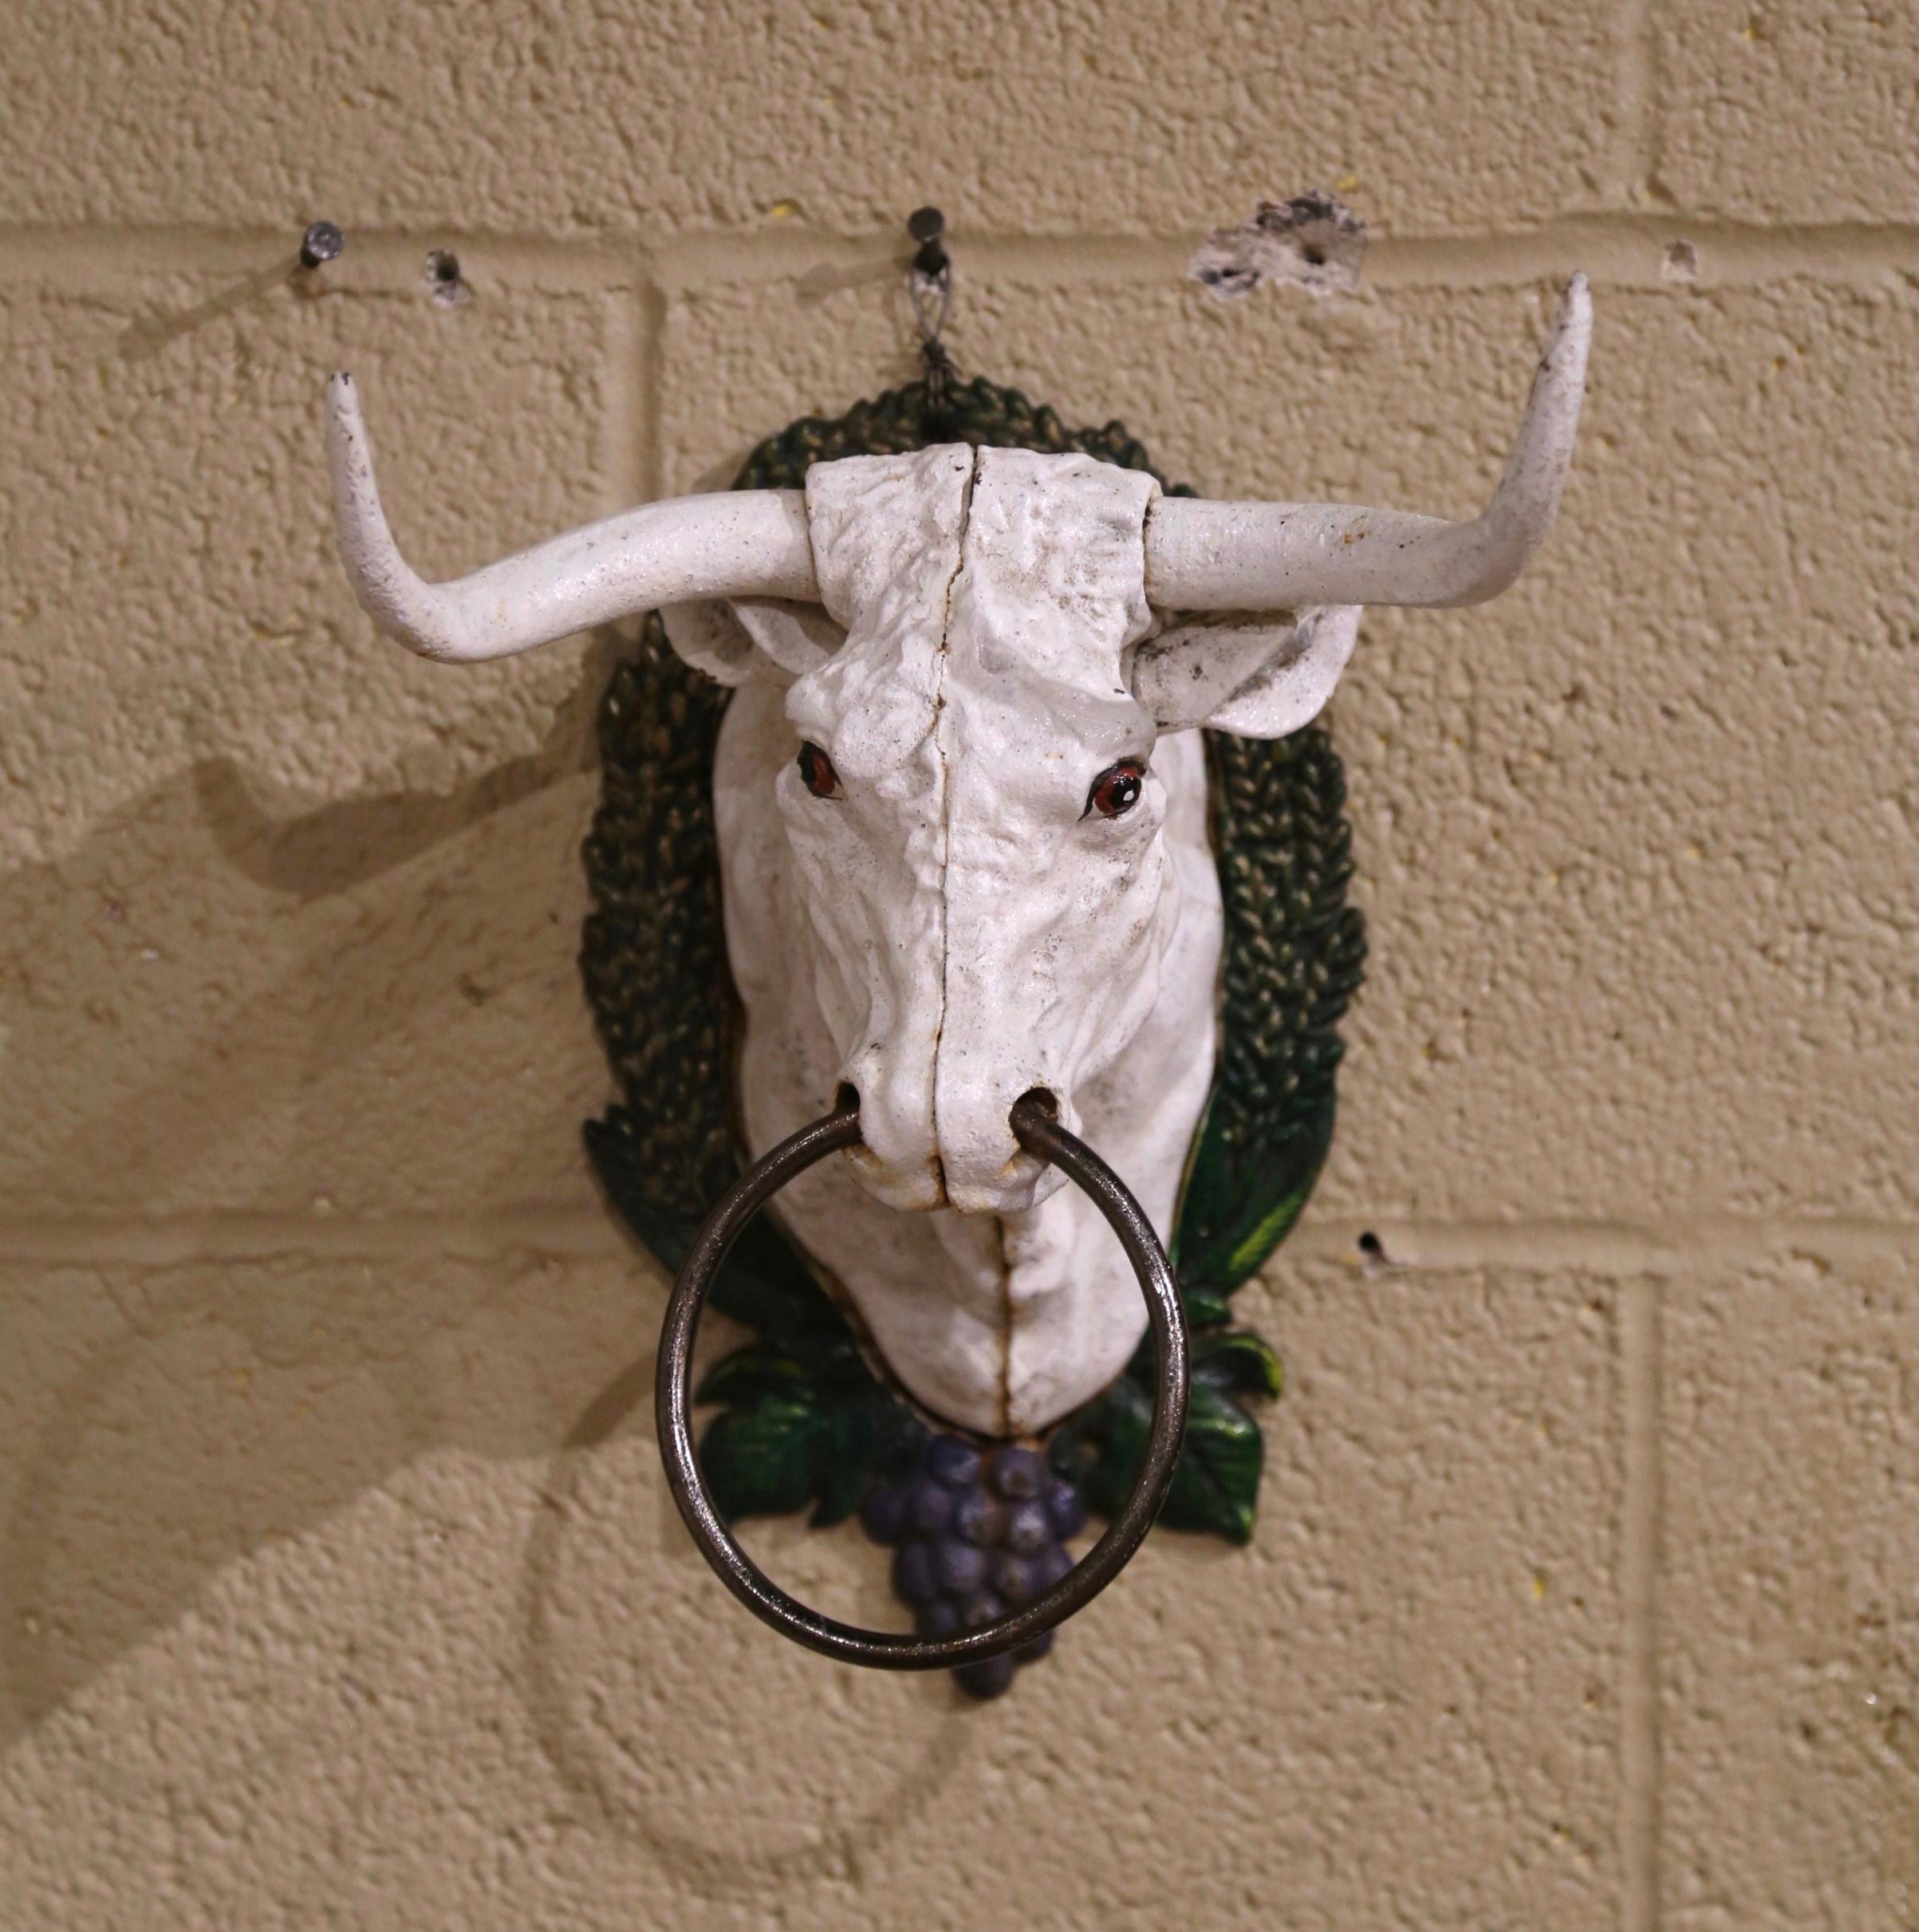 This beautiful cow head bust was crafted in France circa 1960. The hand carved sculpture made of iron, features a realistic bull head with two large horns and a metal ring through the nostrils, is surrounded by a foliage border with grape decor